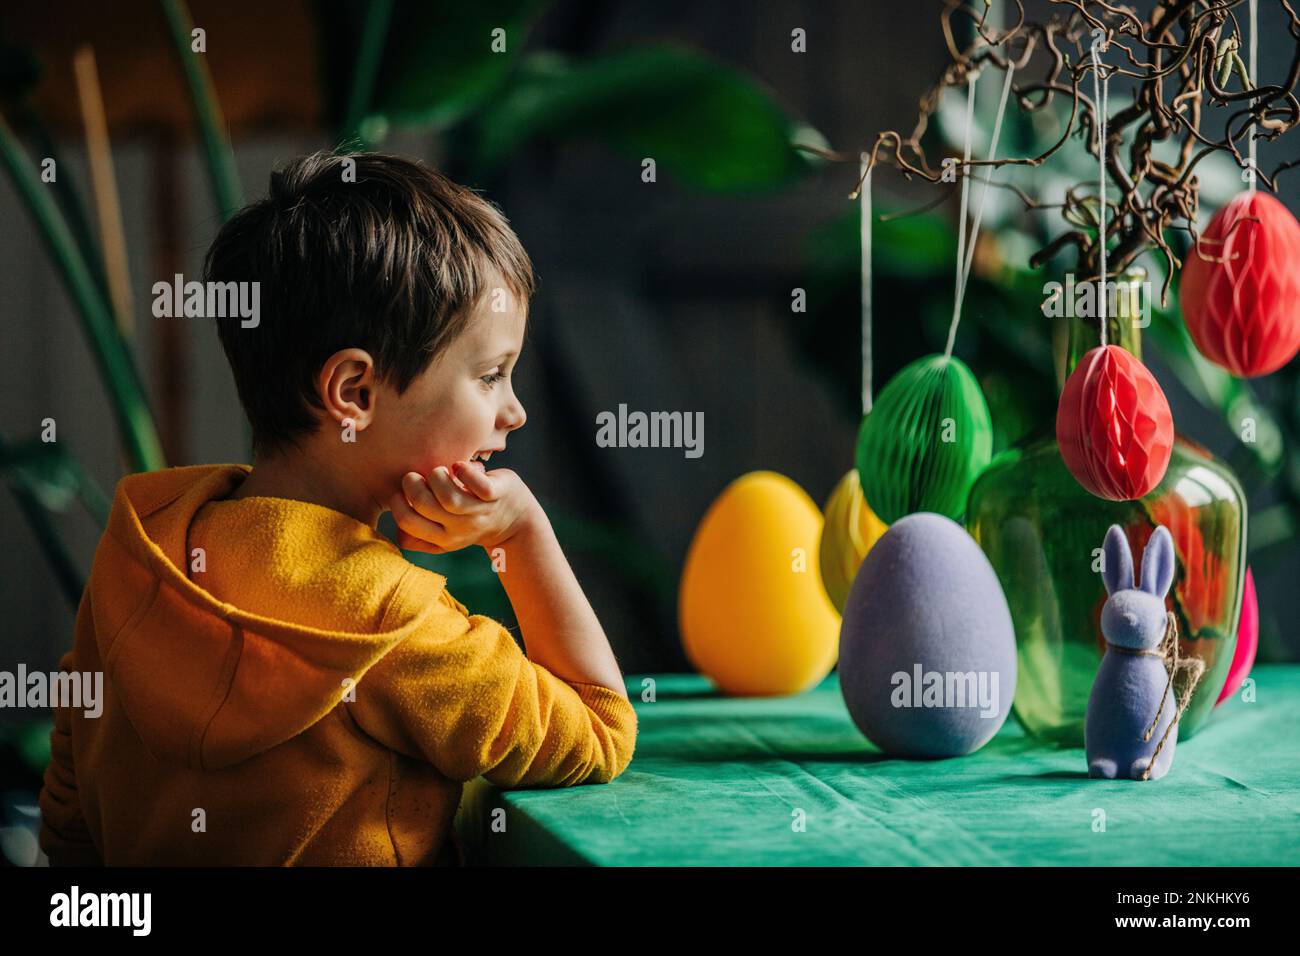 Smiling boy looking at Easter decoration on table at home Stock Photo